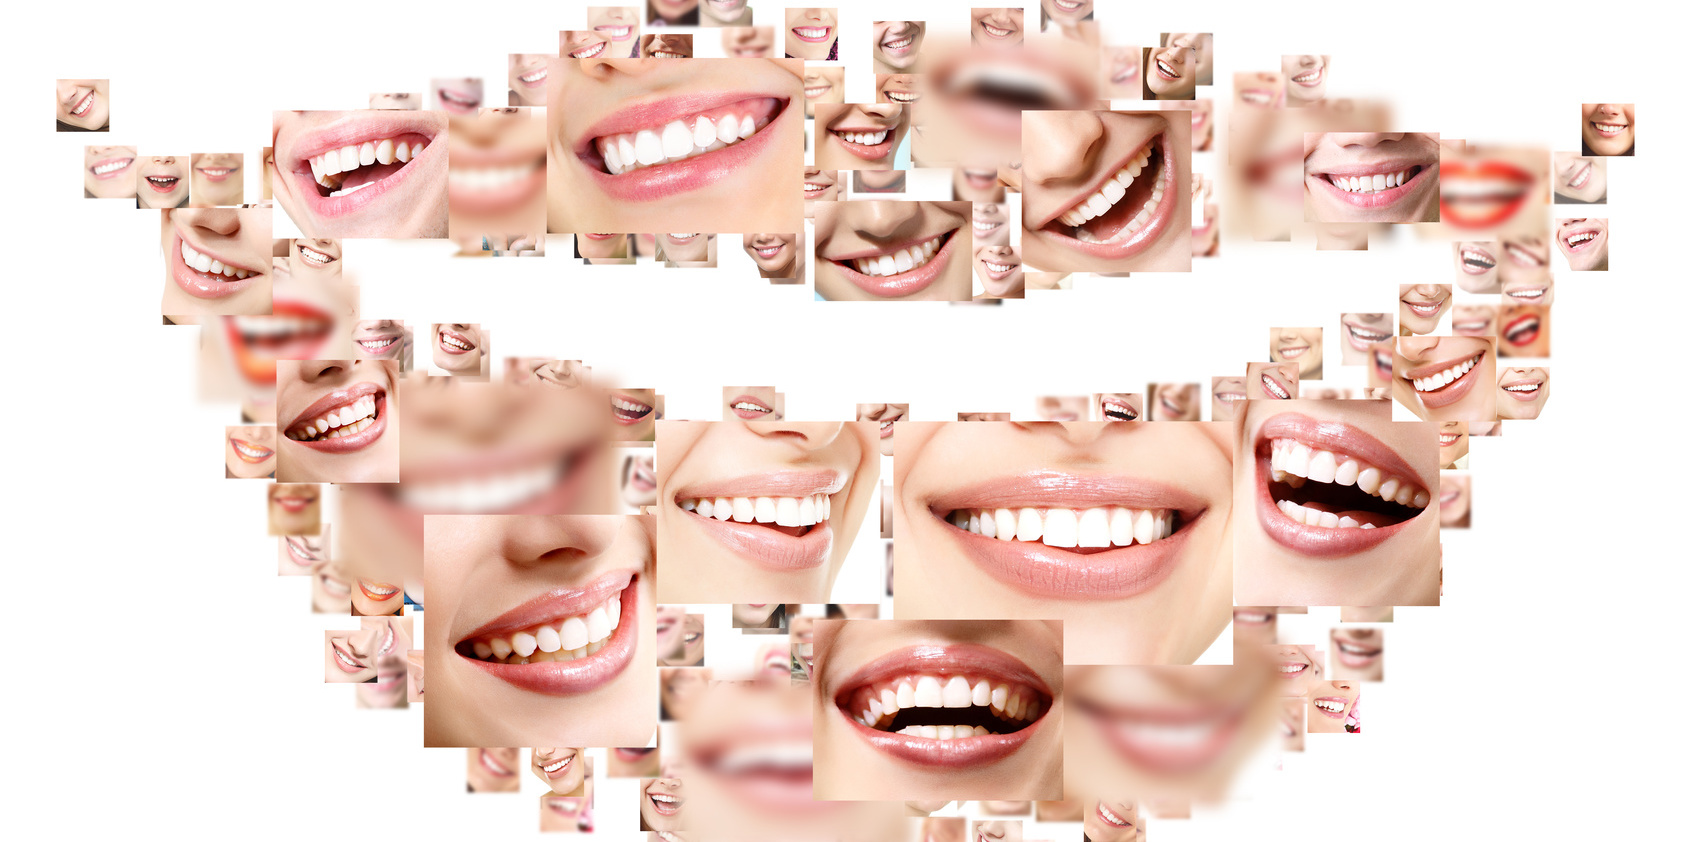 Smile collage of perfect smiling faces closeup. Conceptual set of beautiful wide human smiles with great healthy white teeth. Isolated over white background